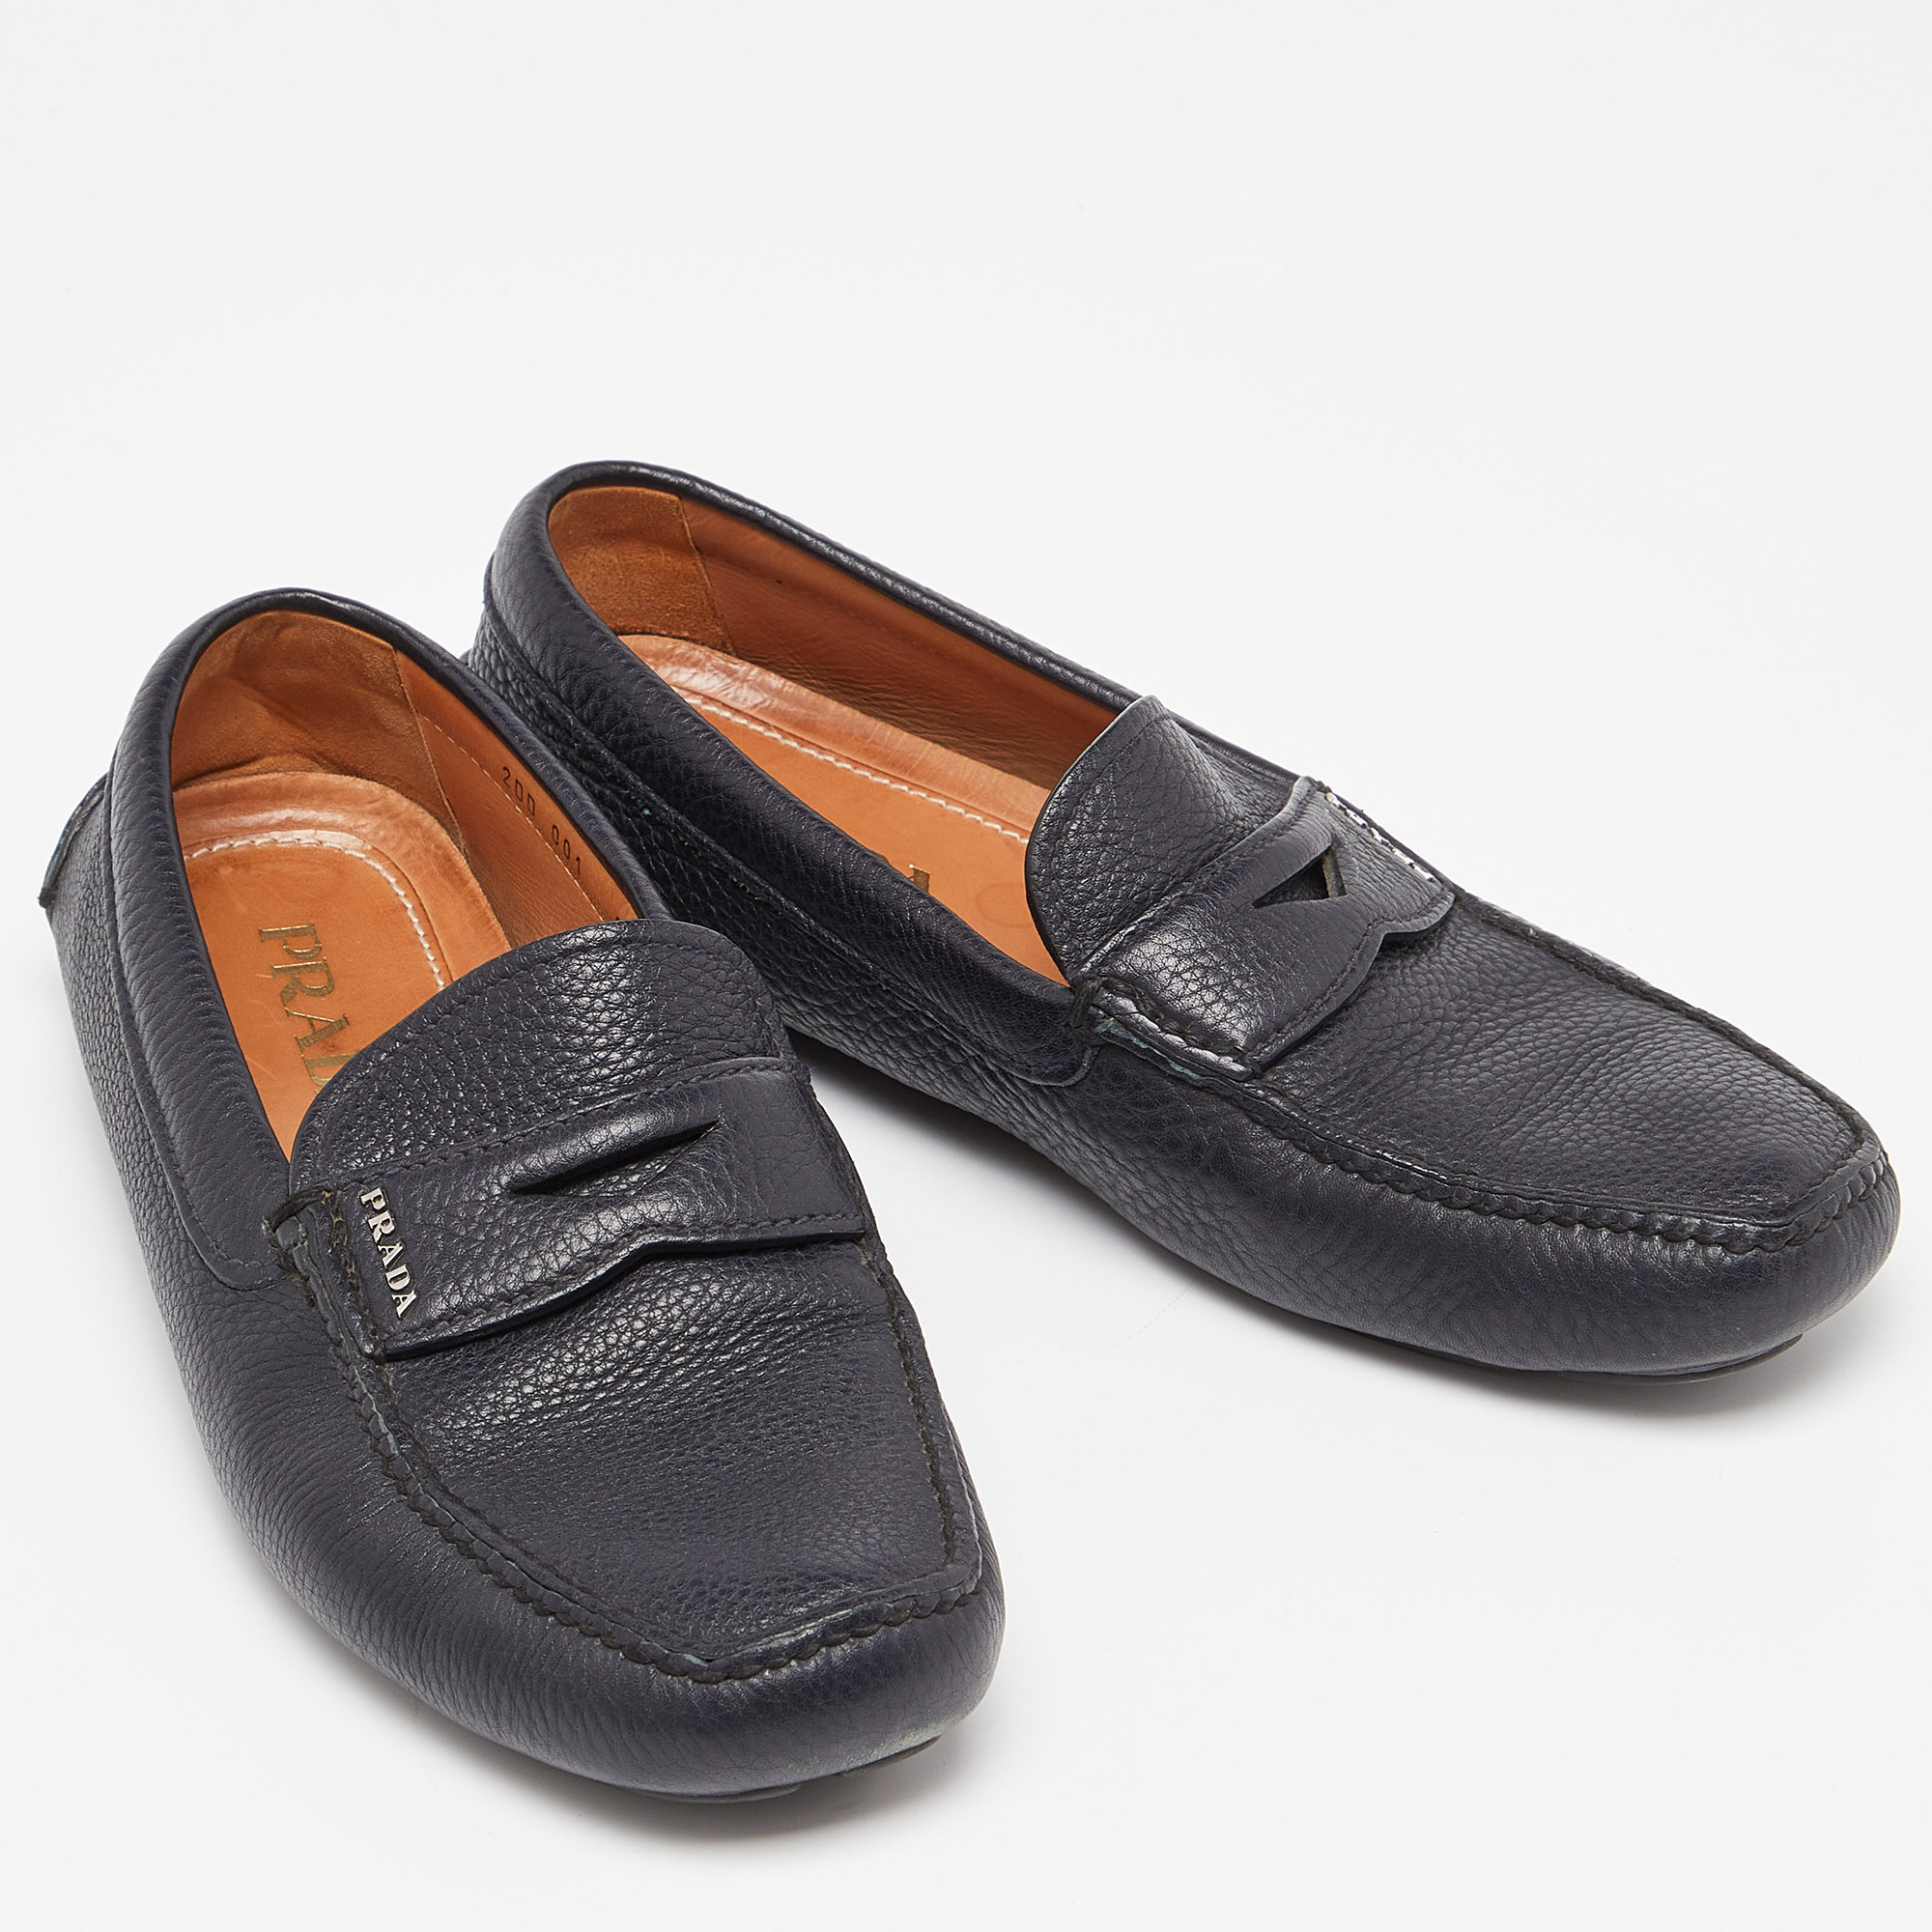 Prada Navy Blue Leather Penny Loafers Size 40.5